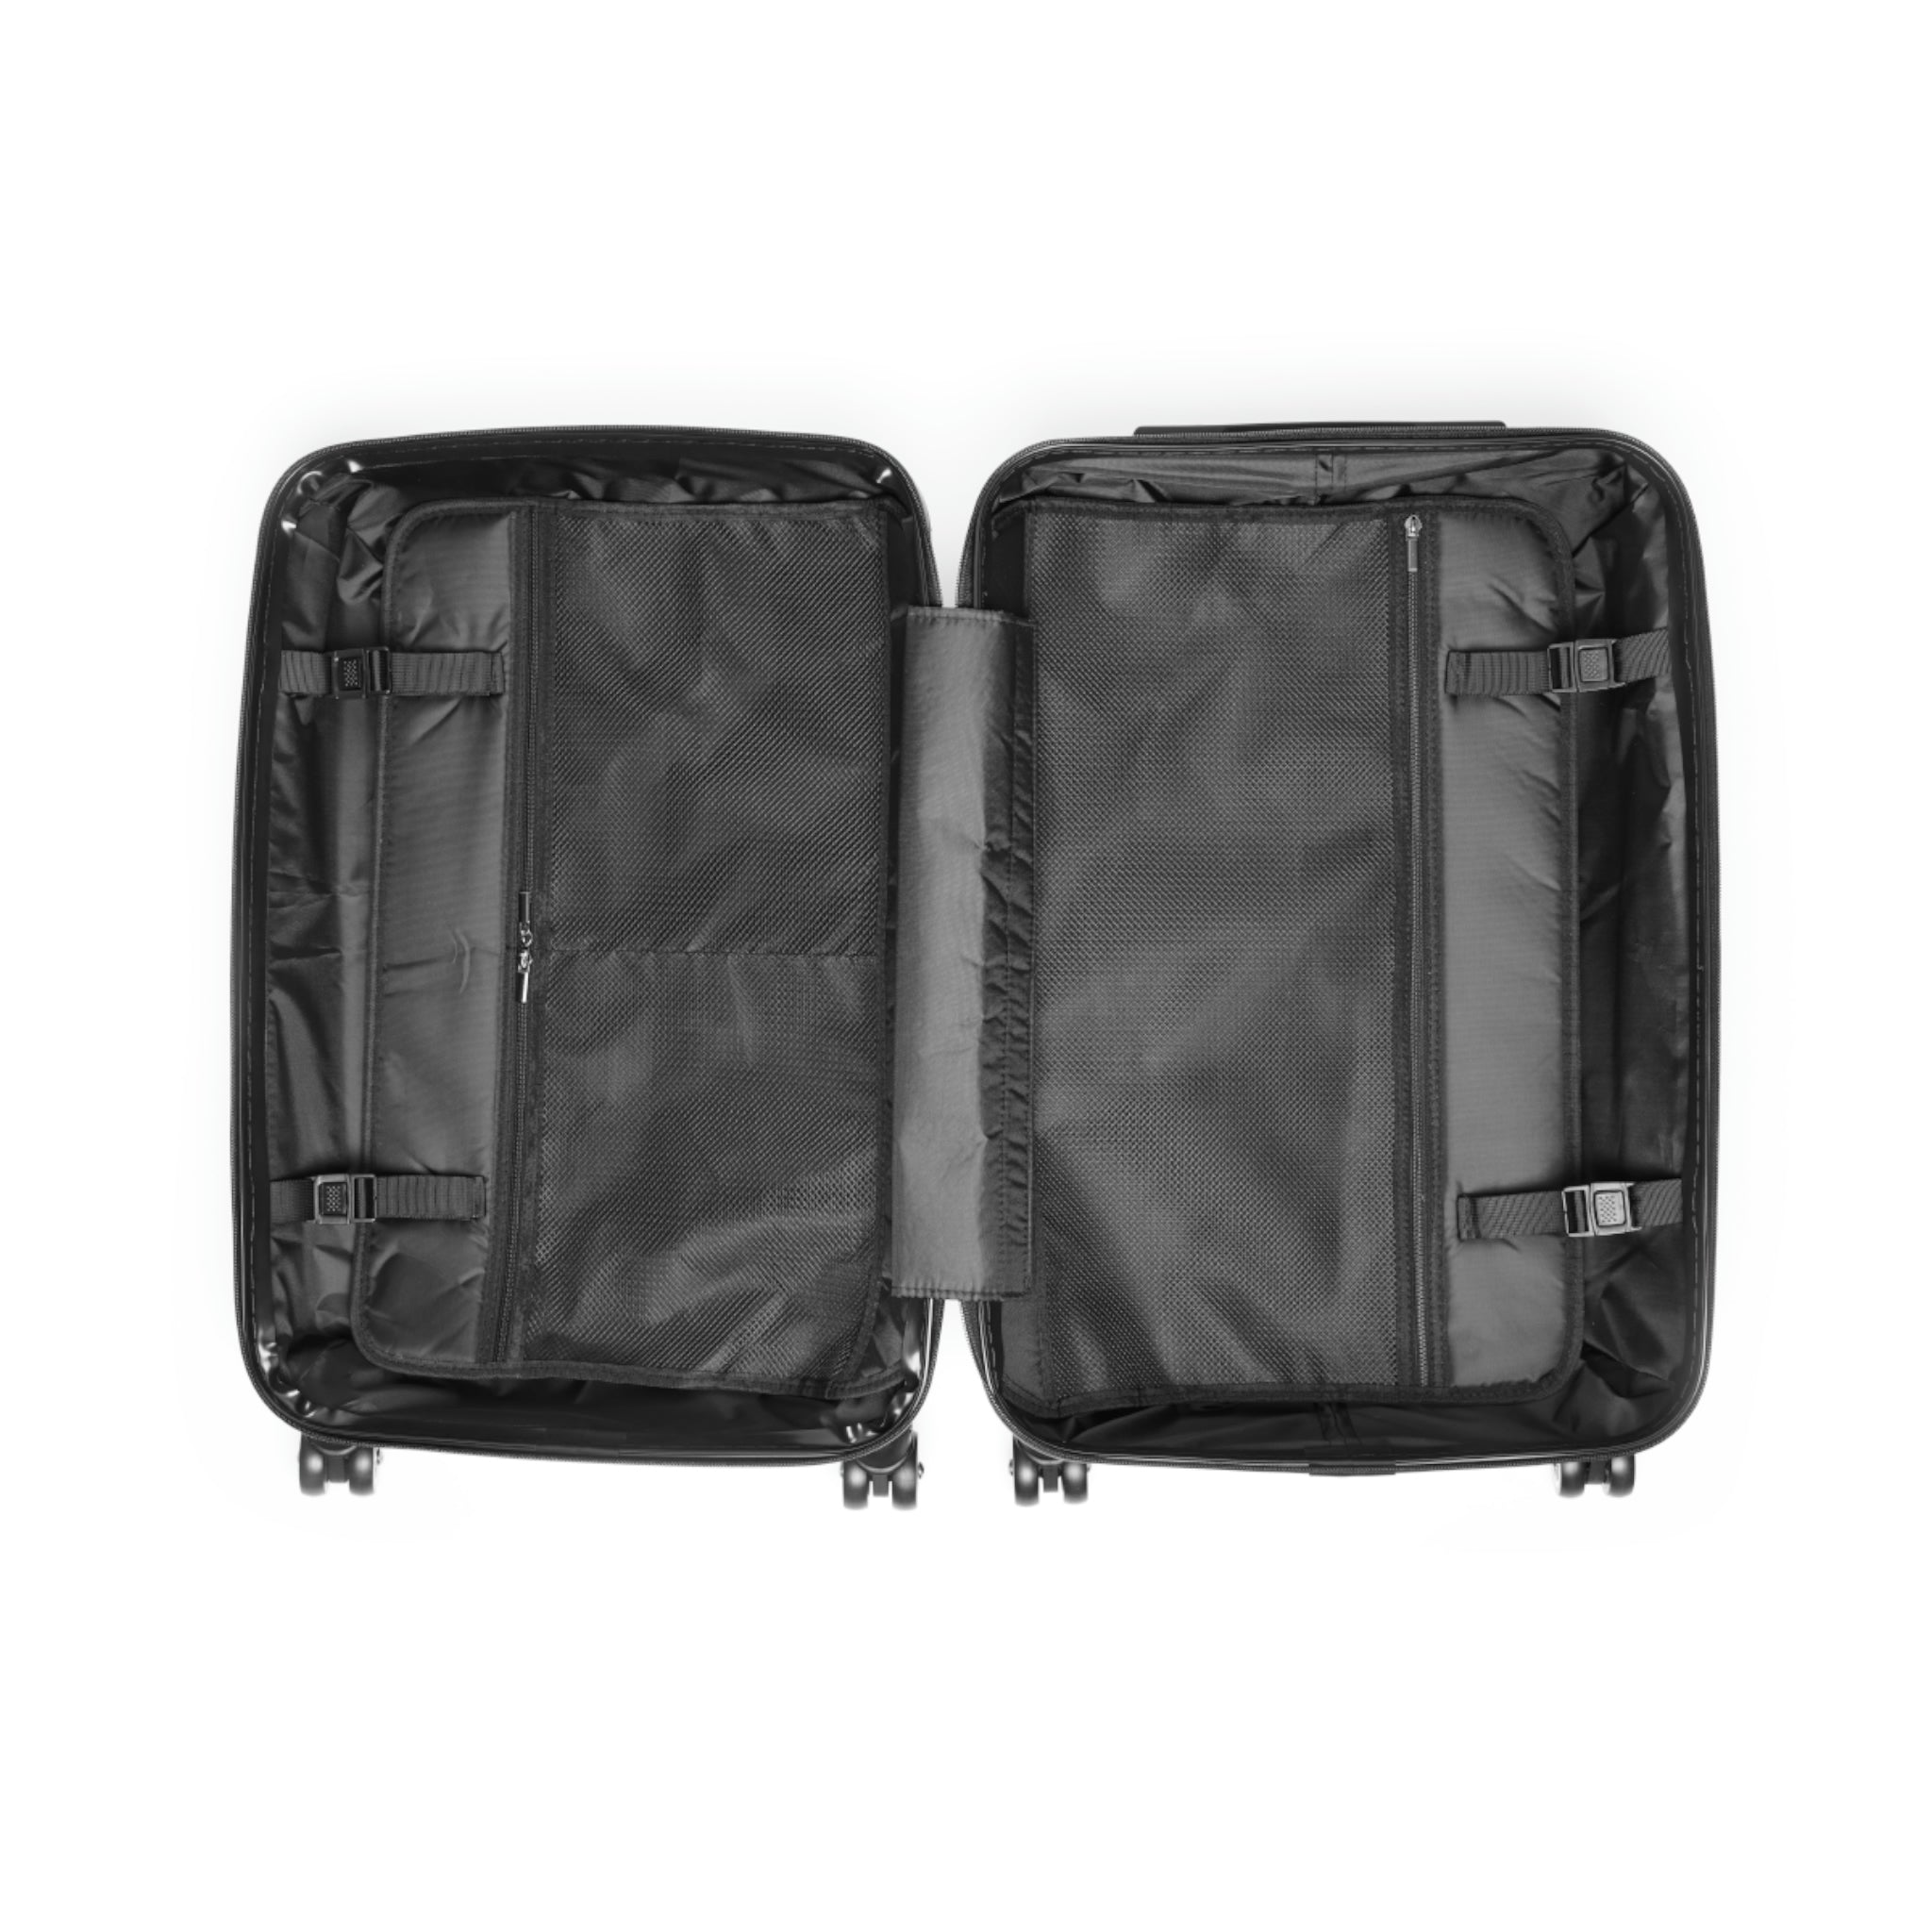 Sage Fire Bearpaw Suitcases